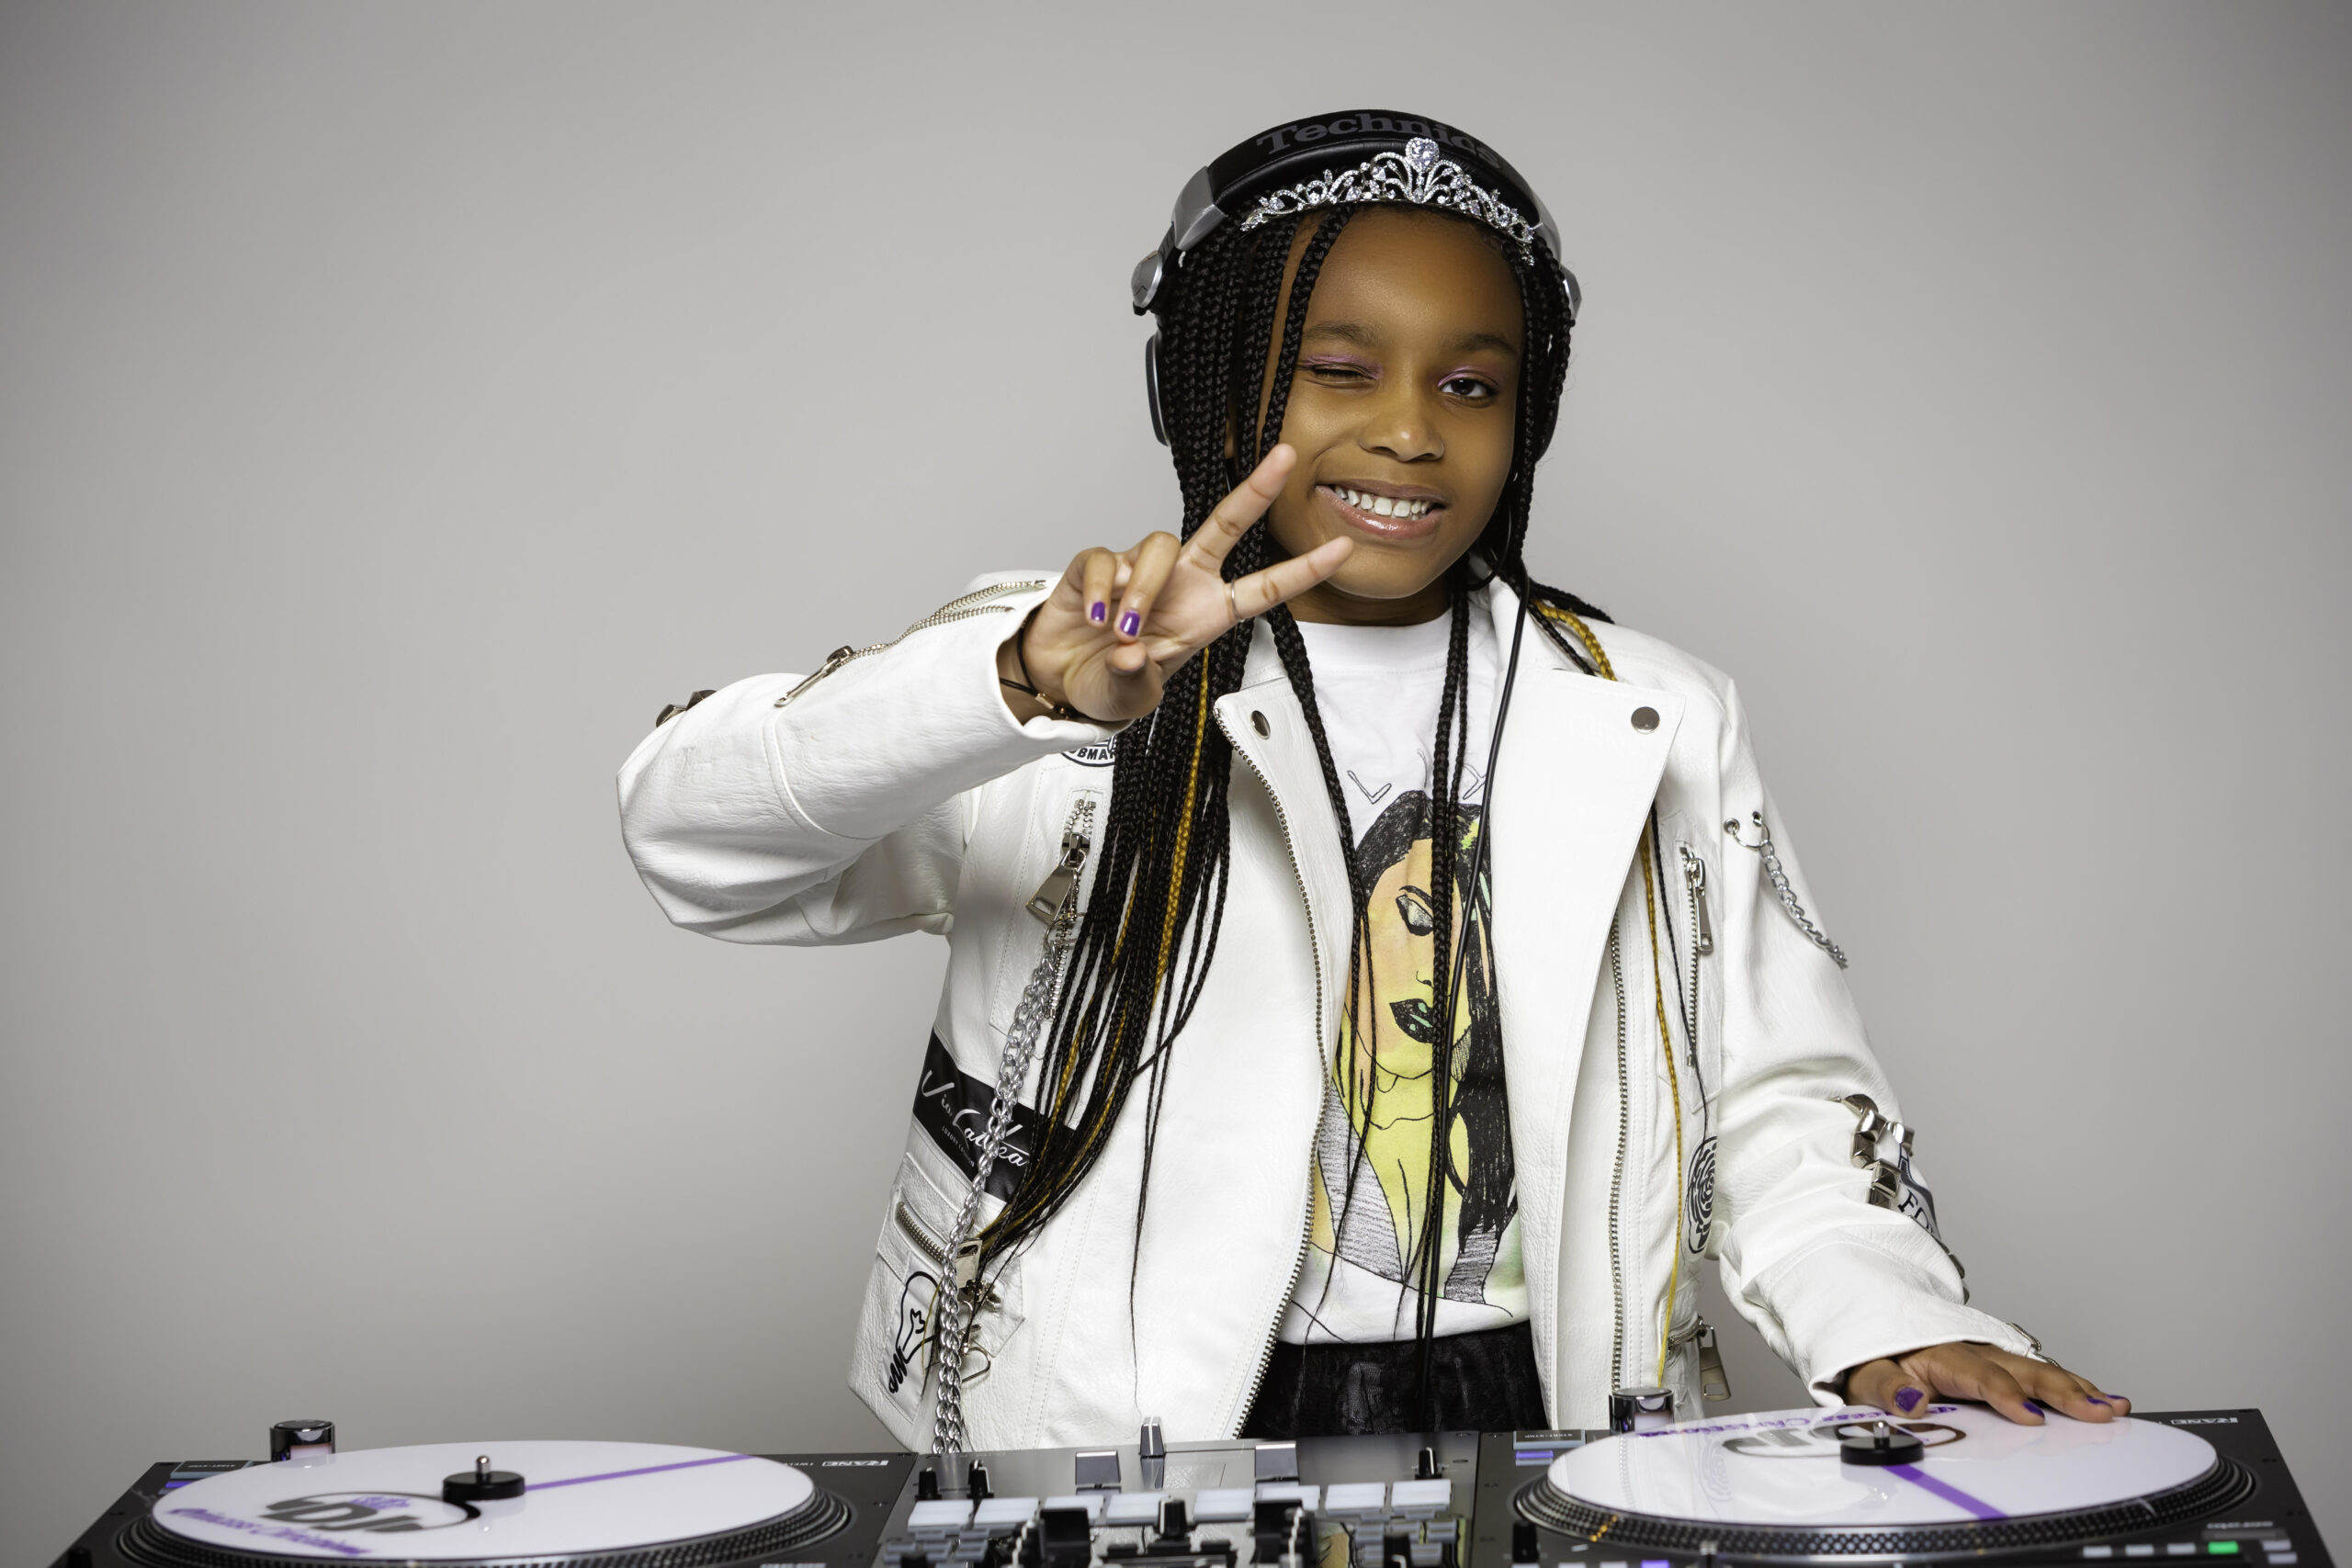 Christiona Graham, AKA DJ Princess C, loves spinning several genres of music including hip-hop, gospel, pop and R & B at locations throughout D.C., MD and VA.